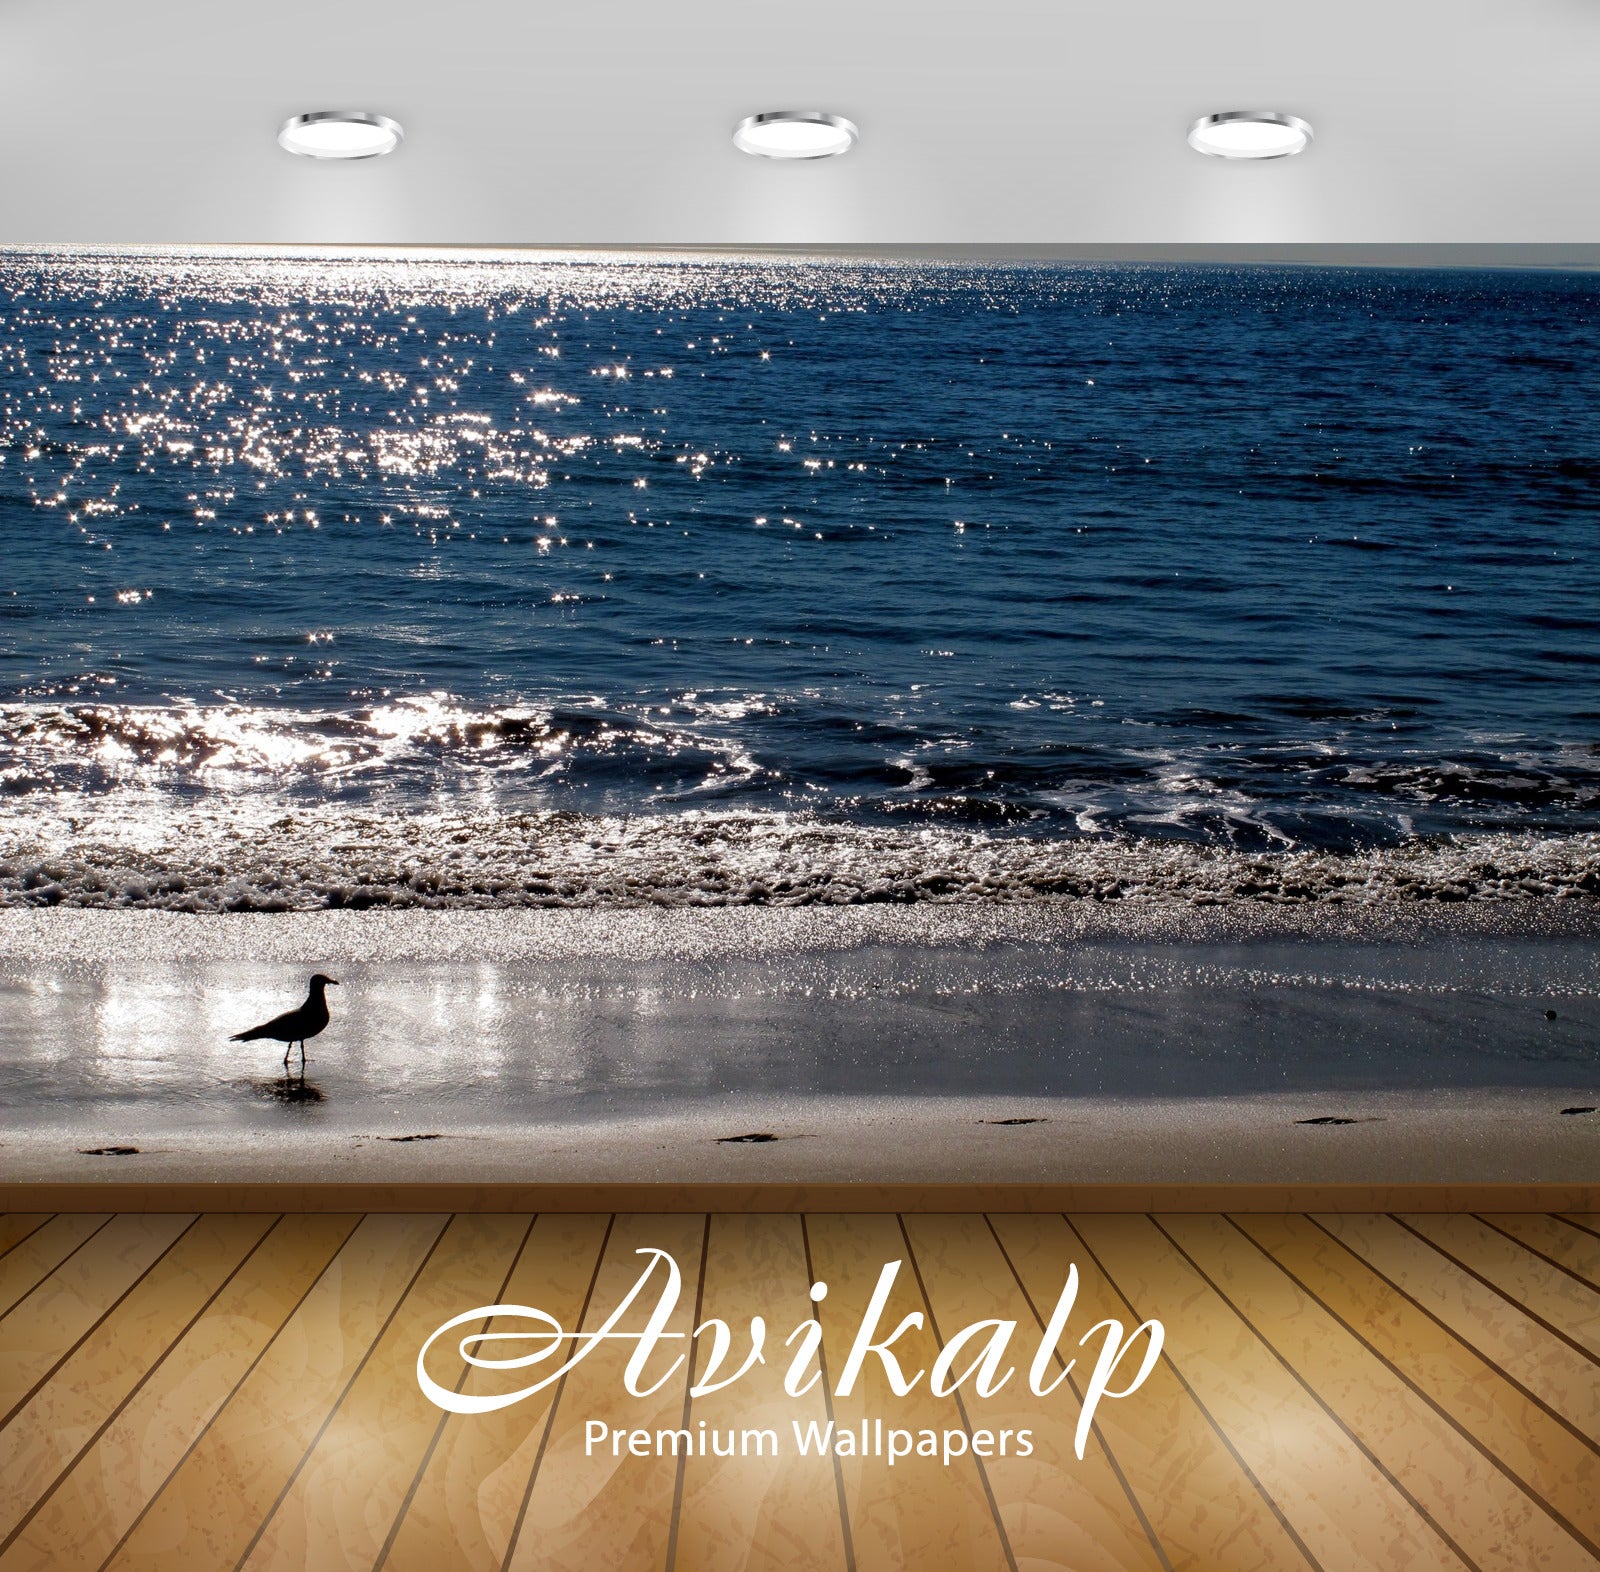 Avikalp Exclusive Awi1827 Bird At The Beach Full HD Wallpapers for Living room, Hall, Kids Room, Kit